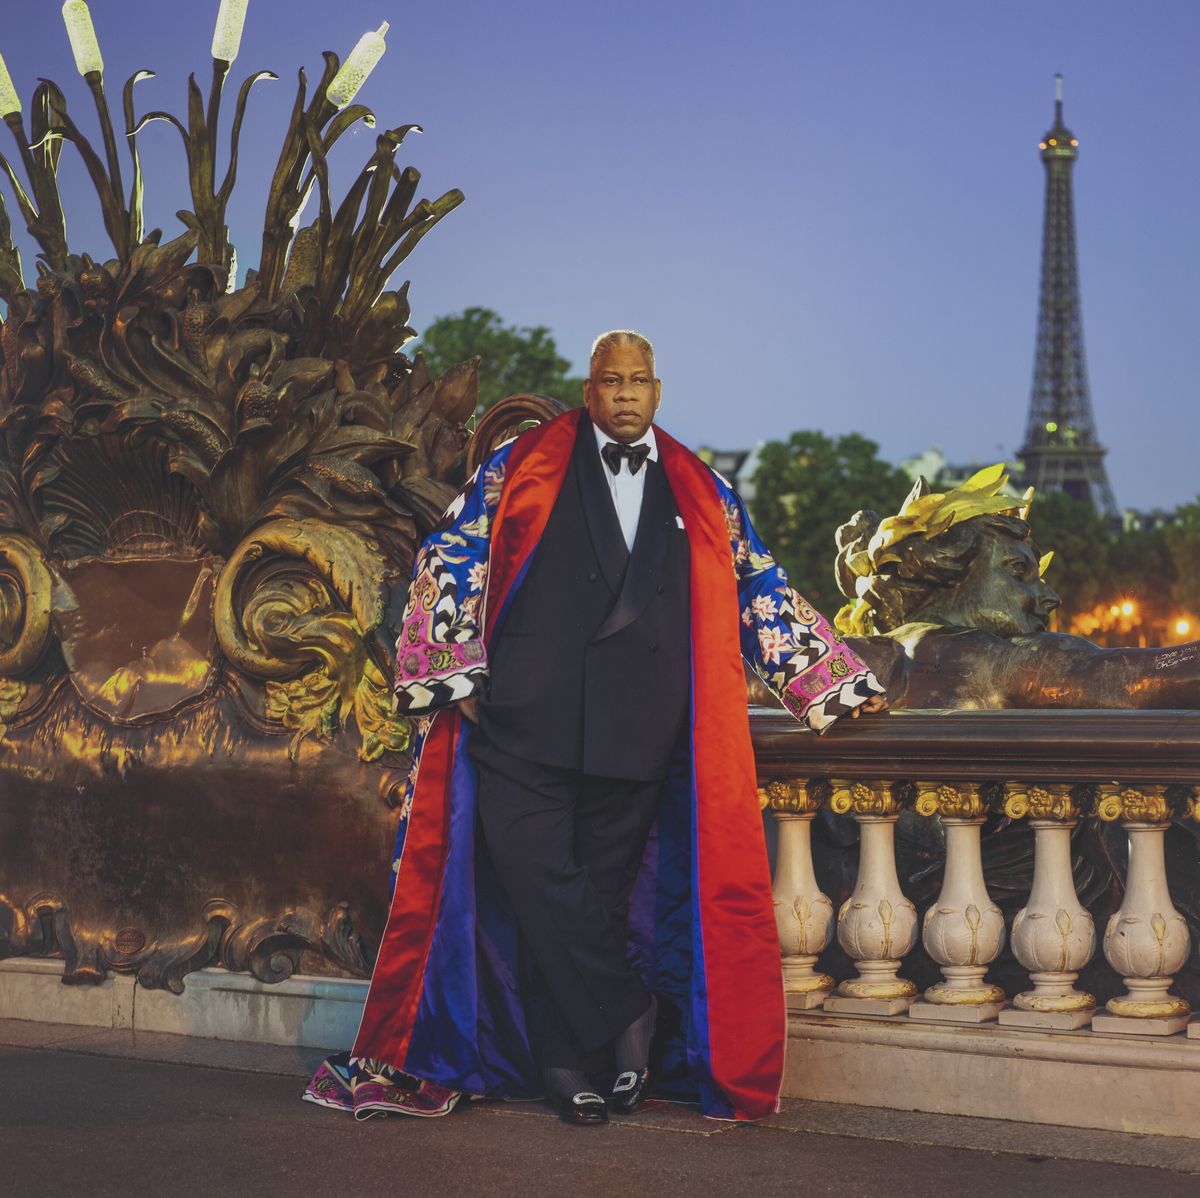 Fashion Editor André Leon Talley's Personal Collection to Auction